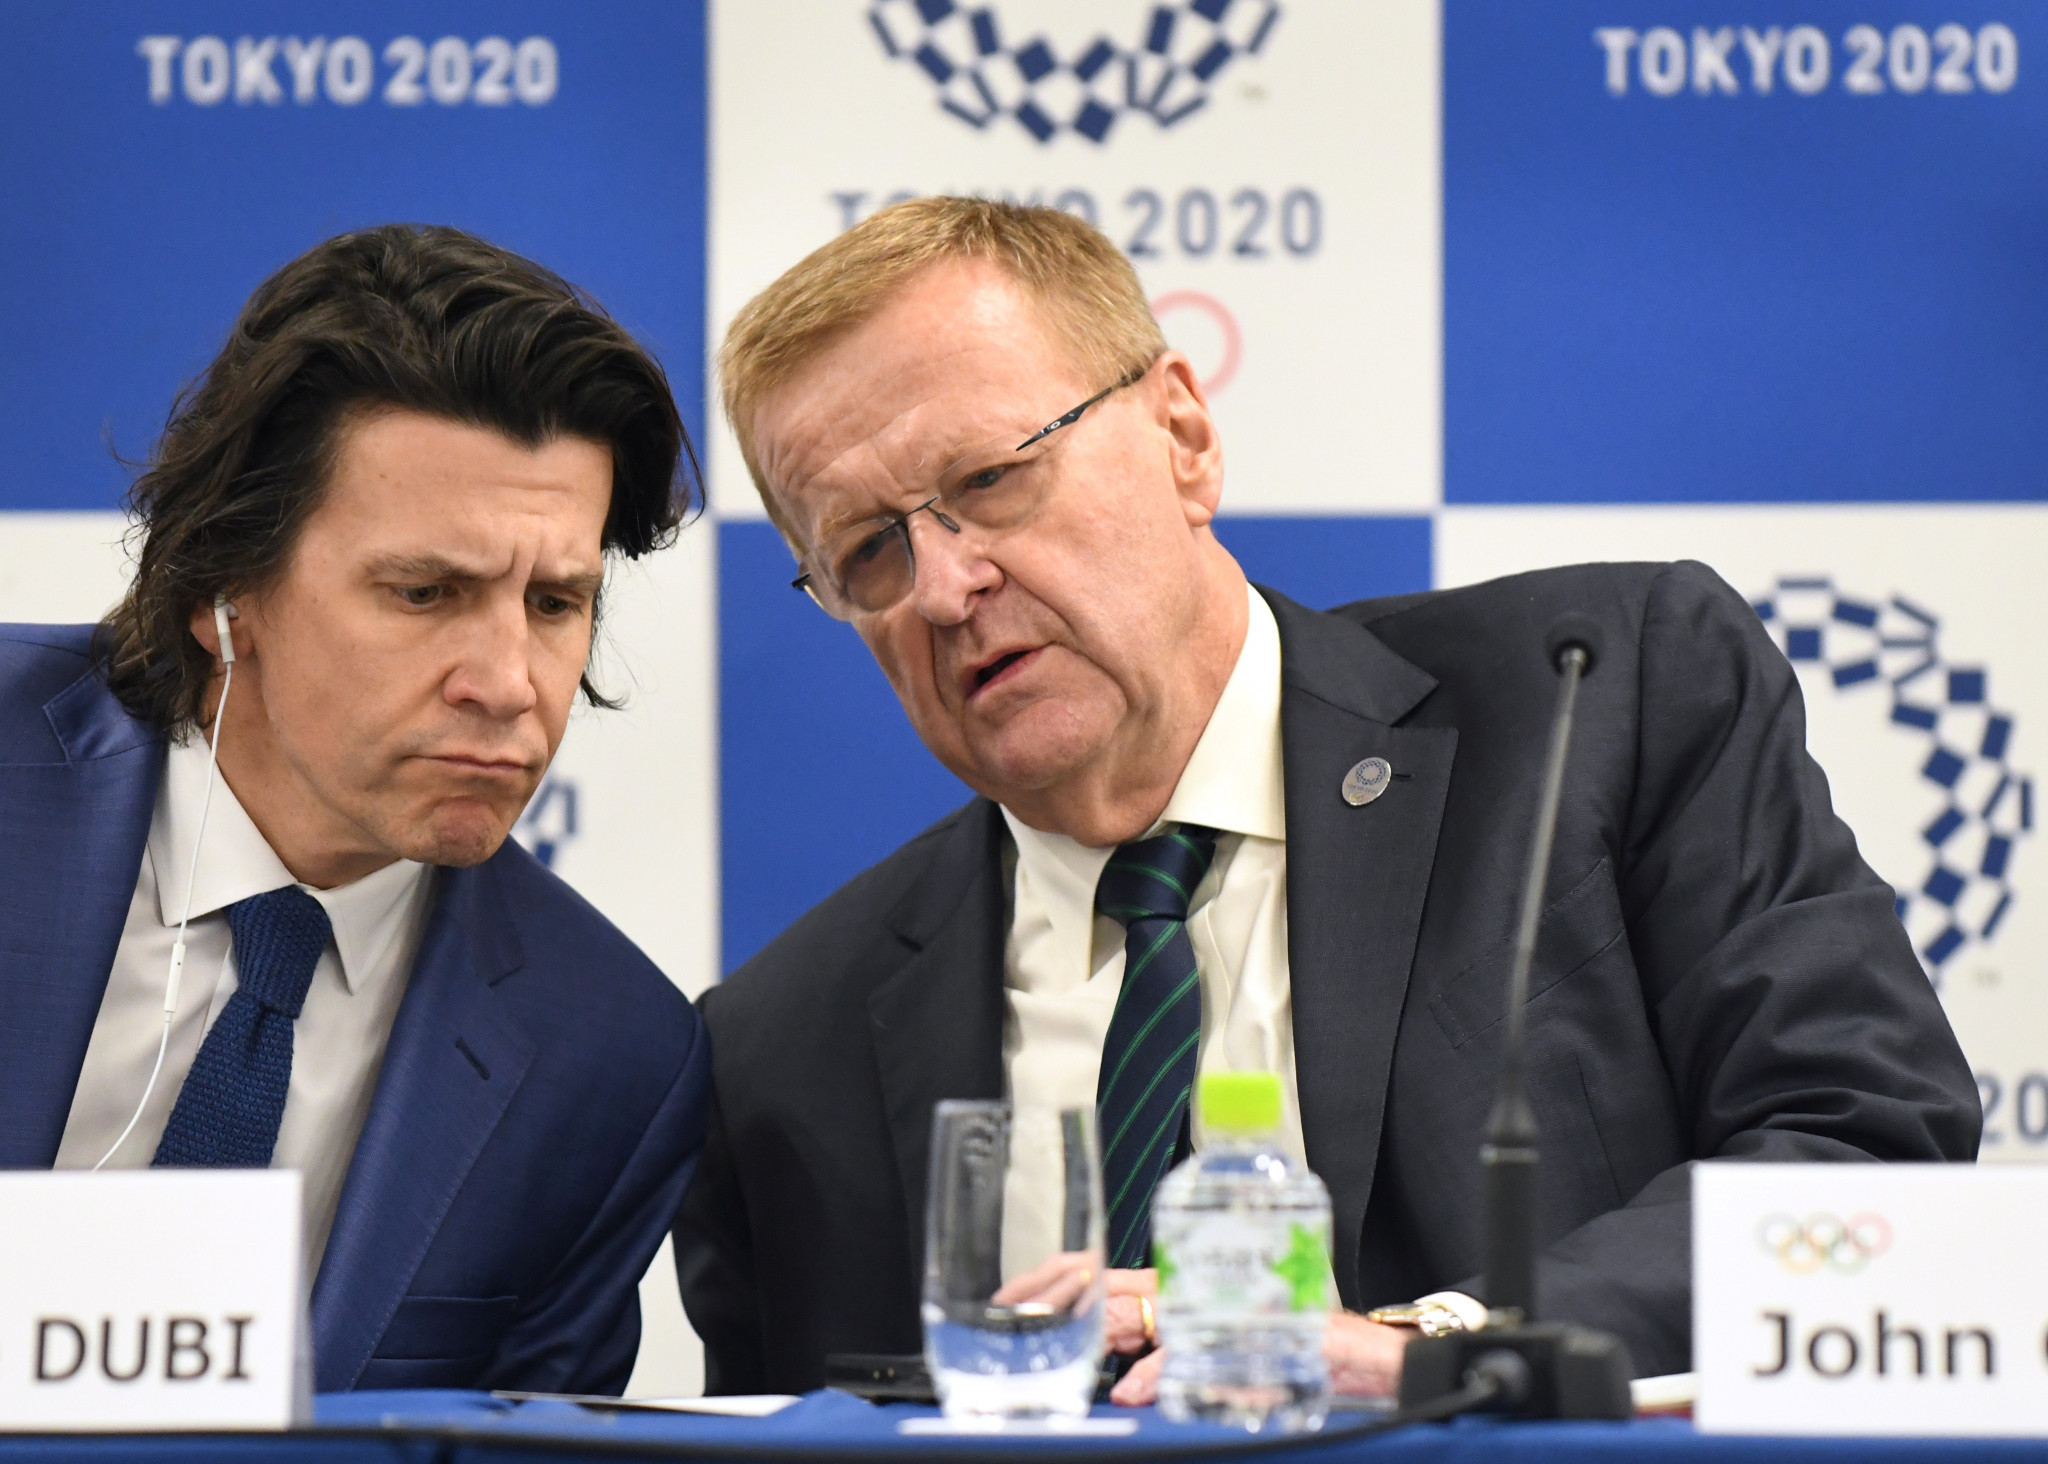 Water quality among unsolved challenges for Tokyo 2020 highlighted by IOC